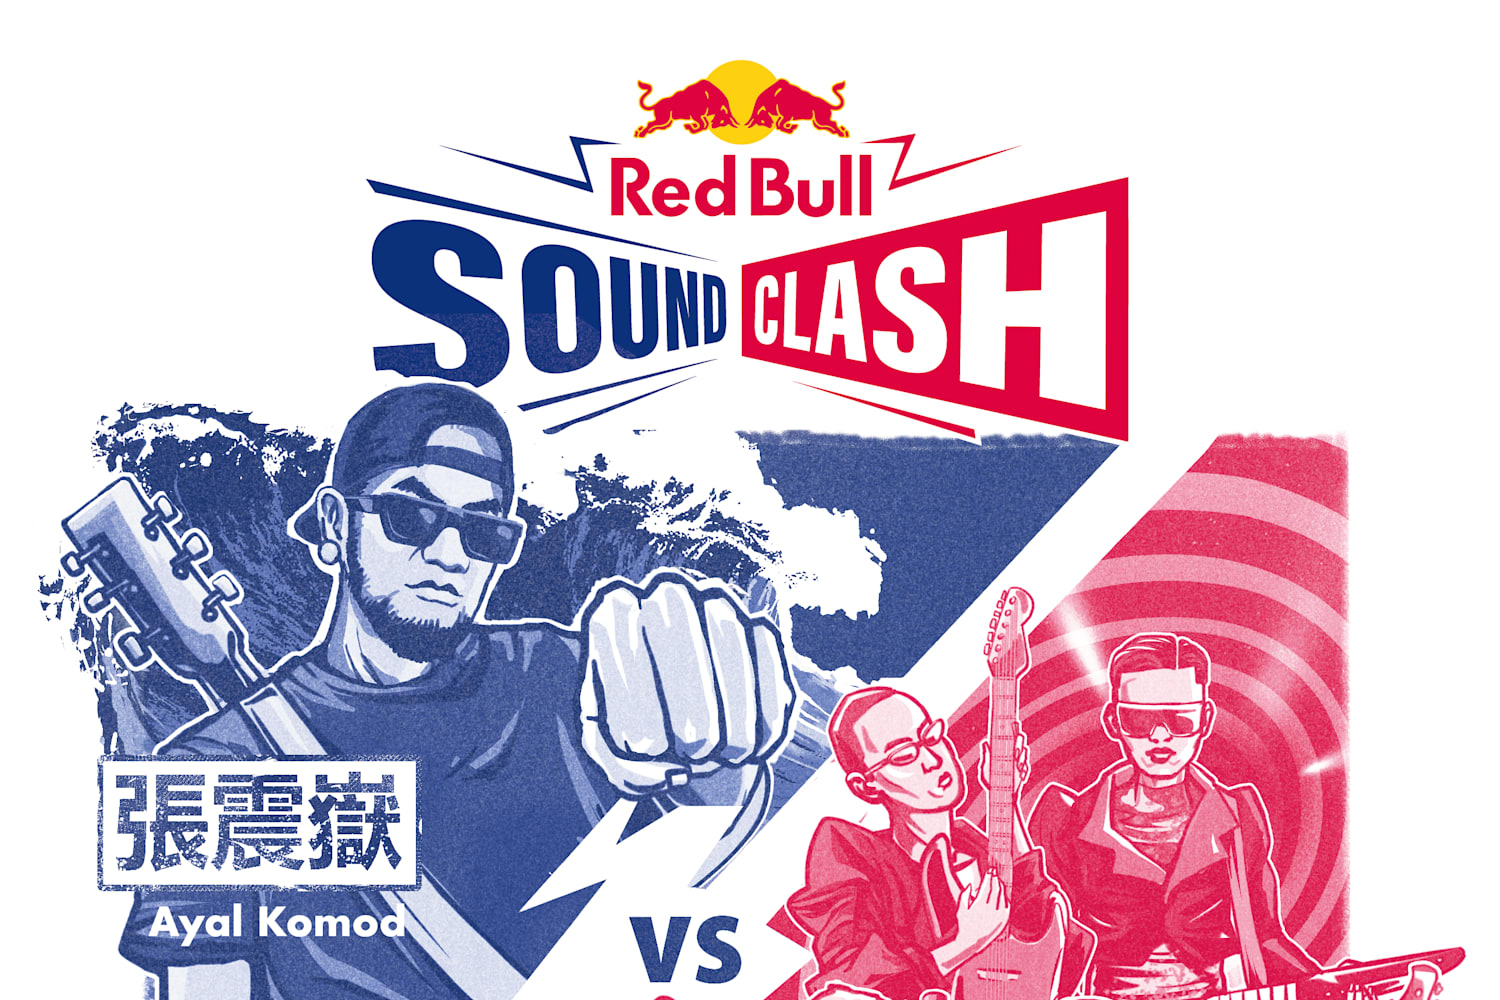 Red Bull SoundClash Taiwan event information